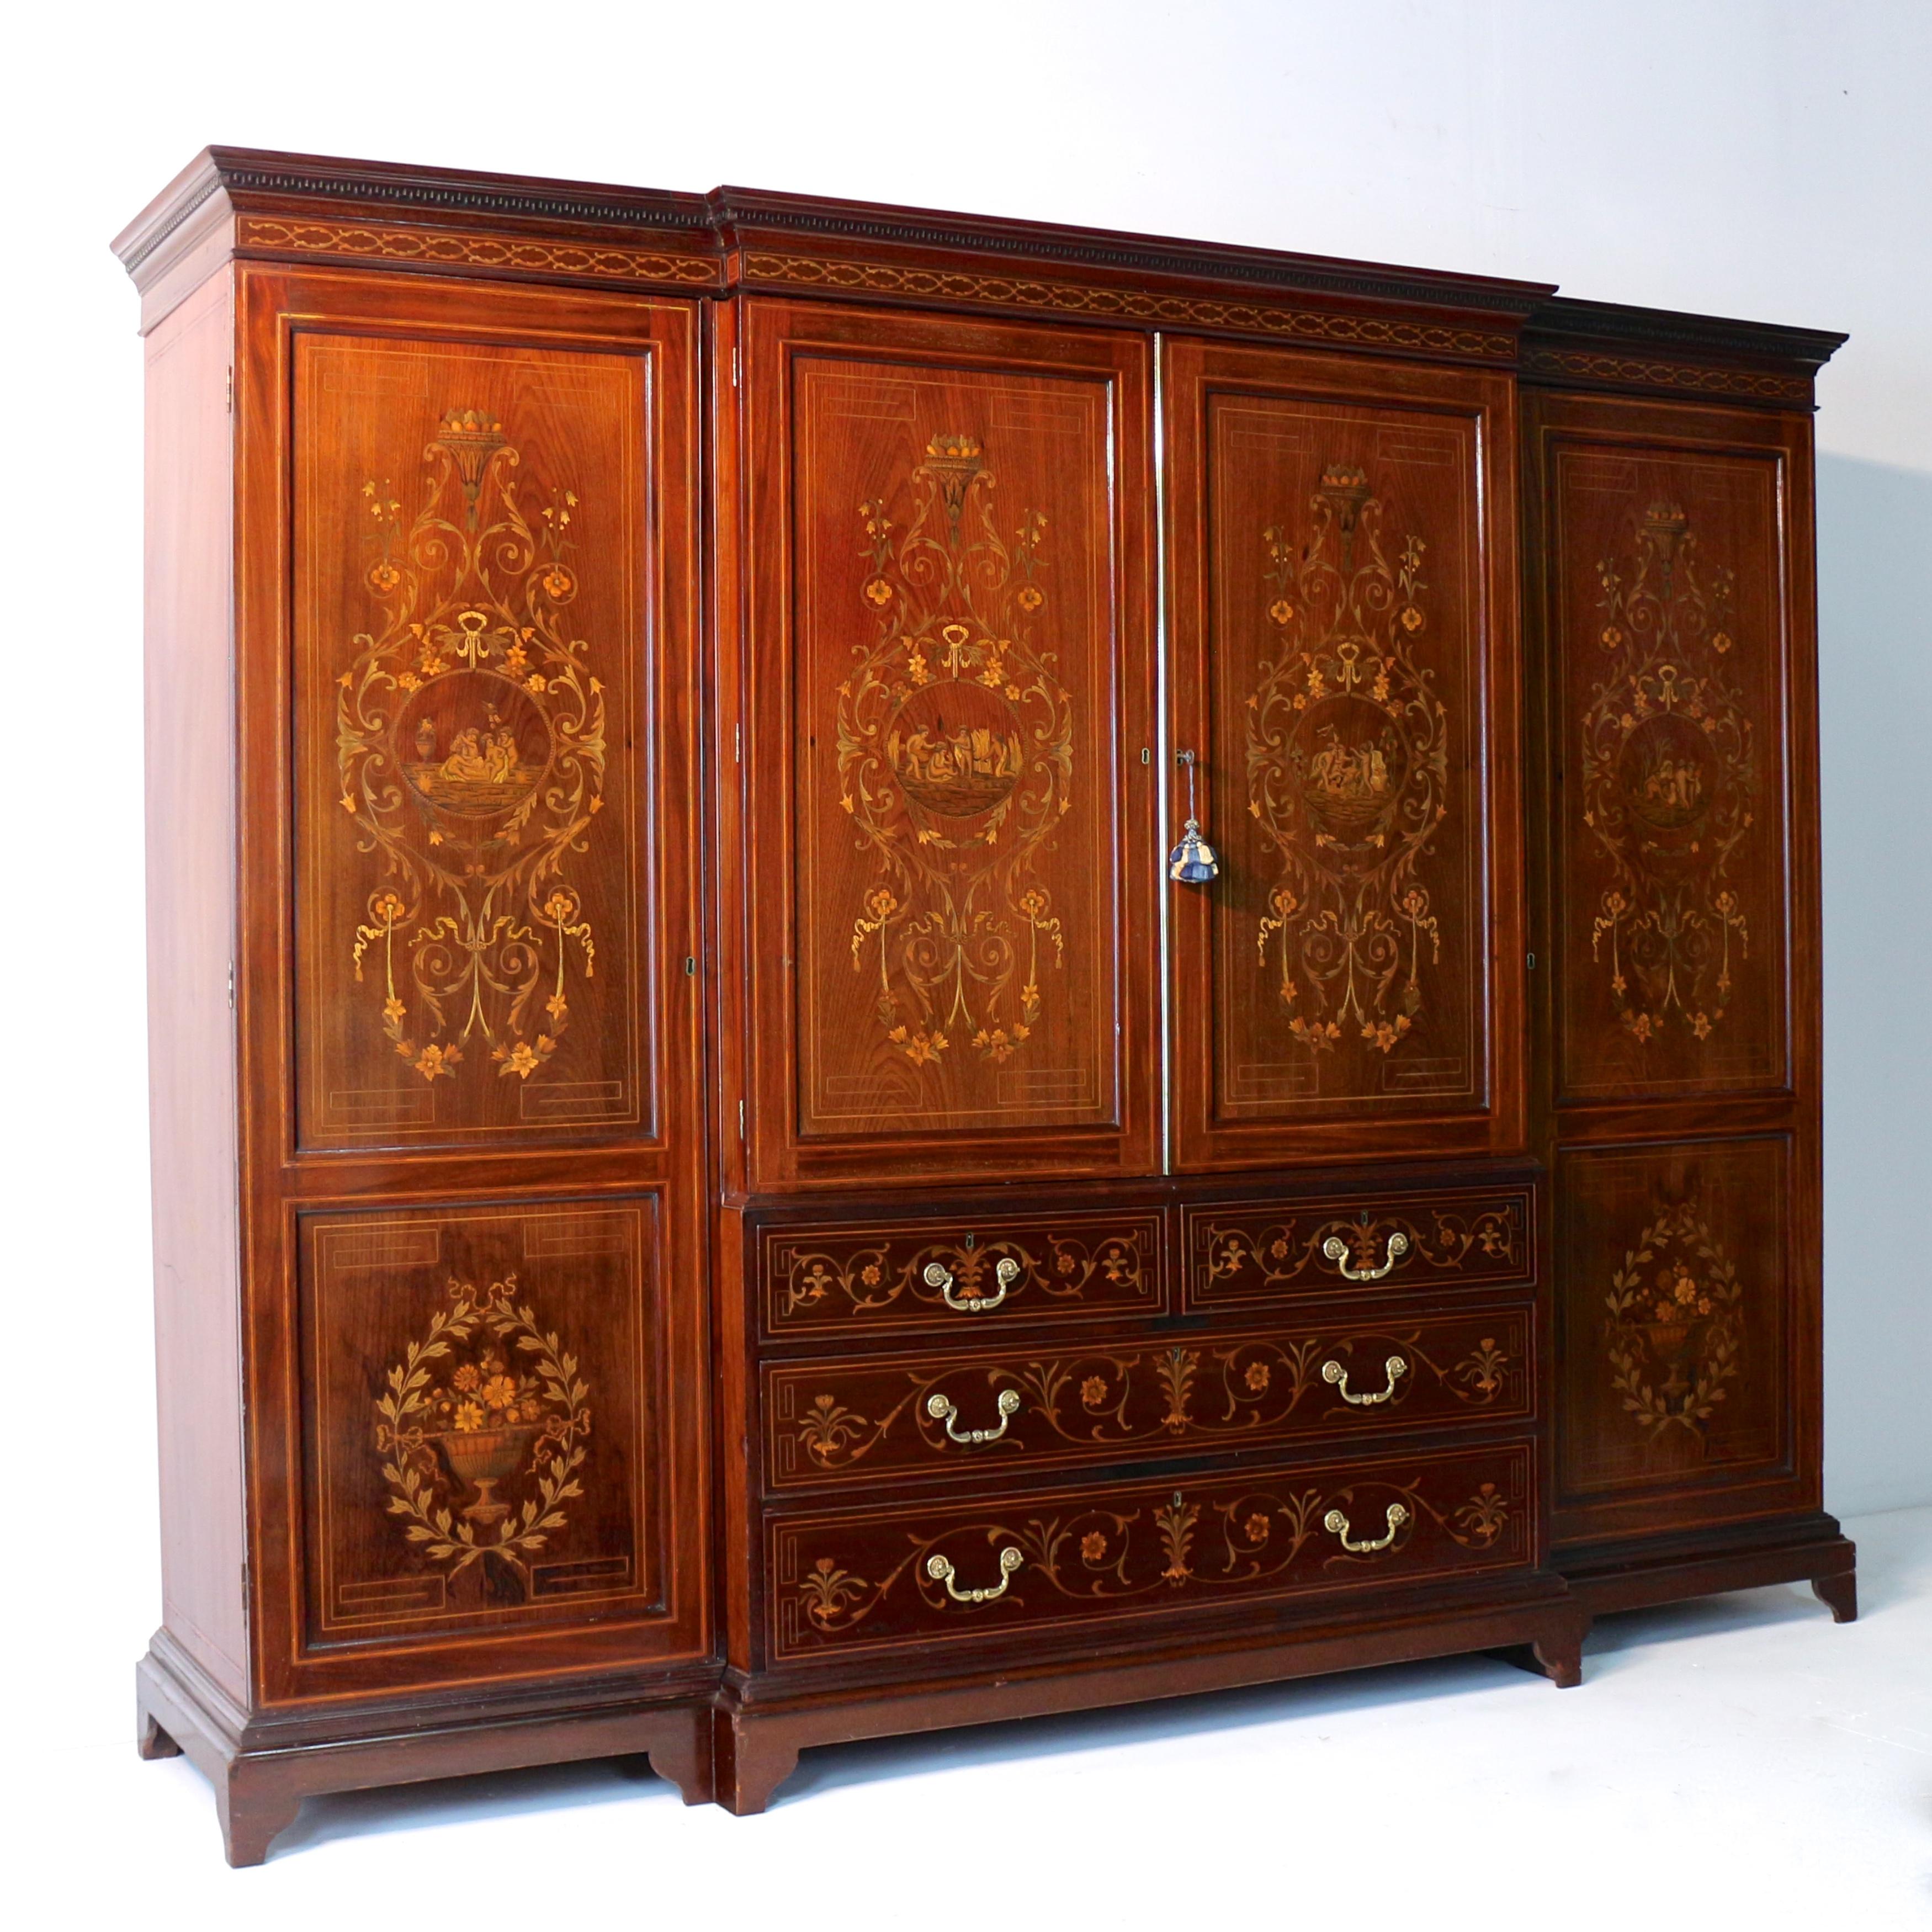 A stunning Sheraton Revival inlaid mahogany breakfront wardrobe dating to the early Victorian period and attributed to Edwards & Roberts.  Profusely decorated with fine quality ribbon tied trailing floral marquetry in veneers including satinwood and